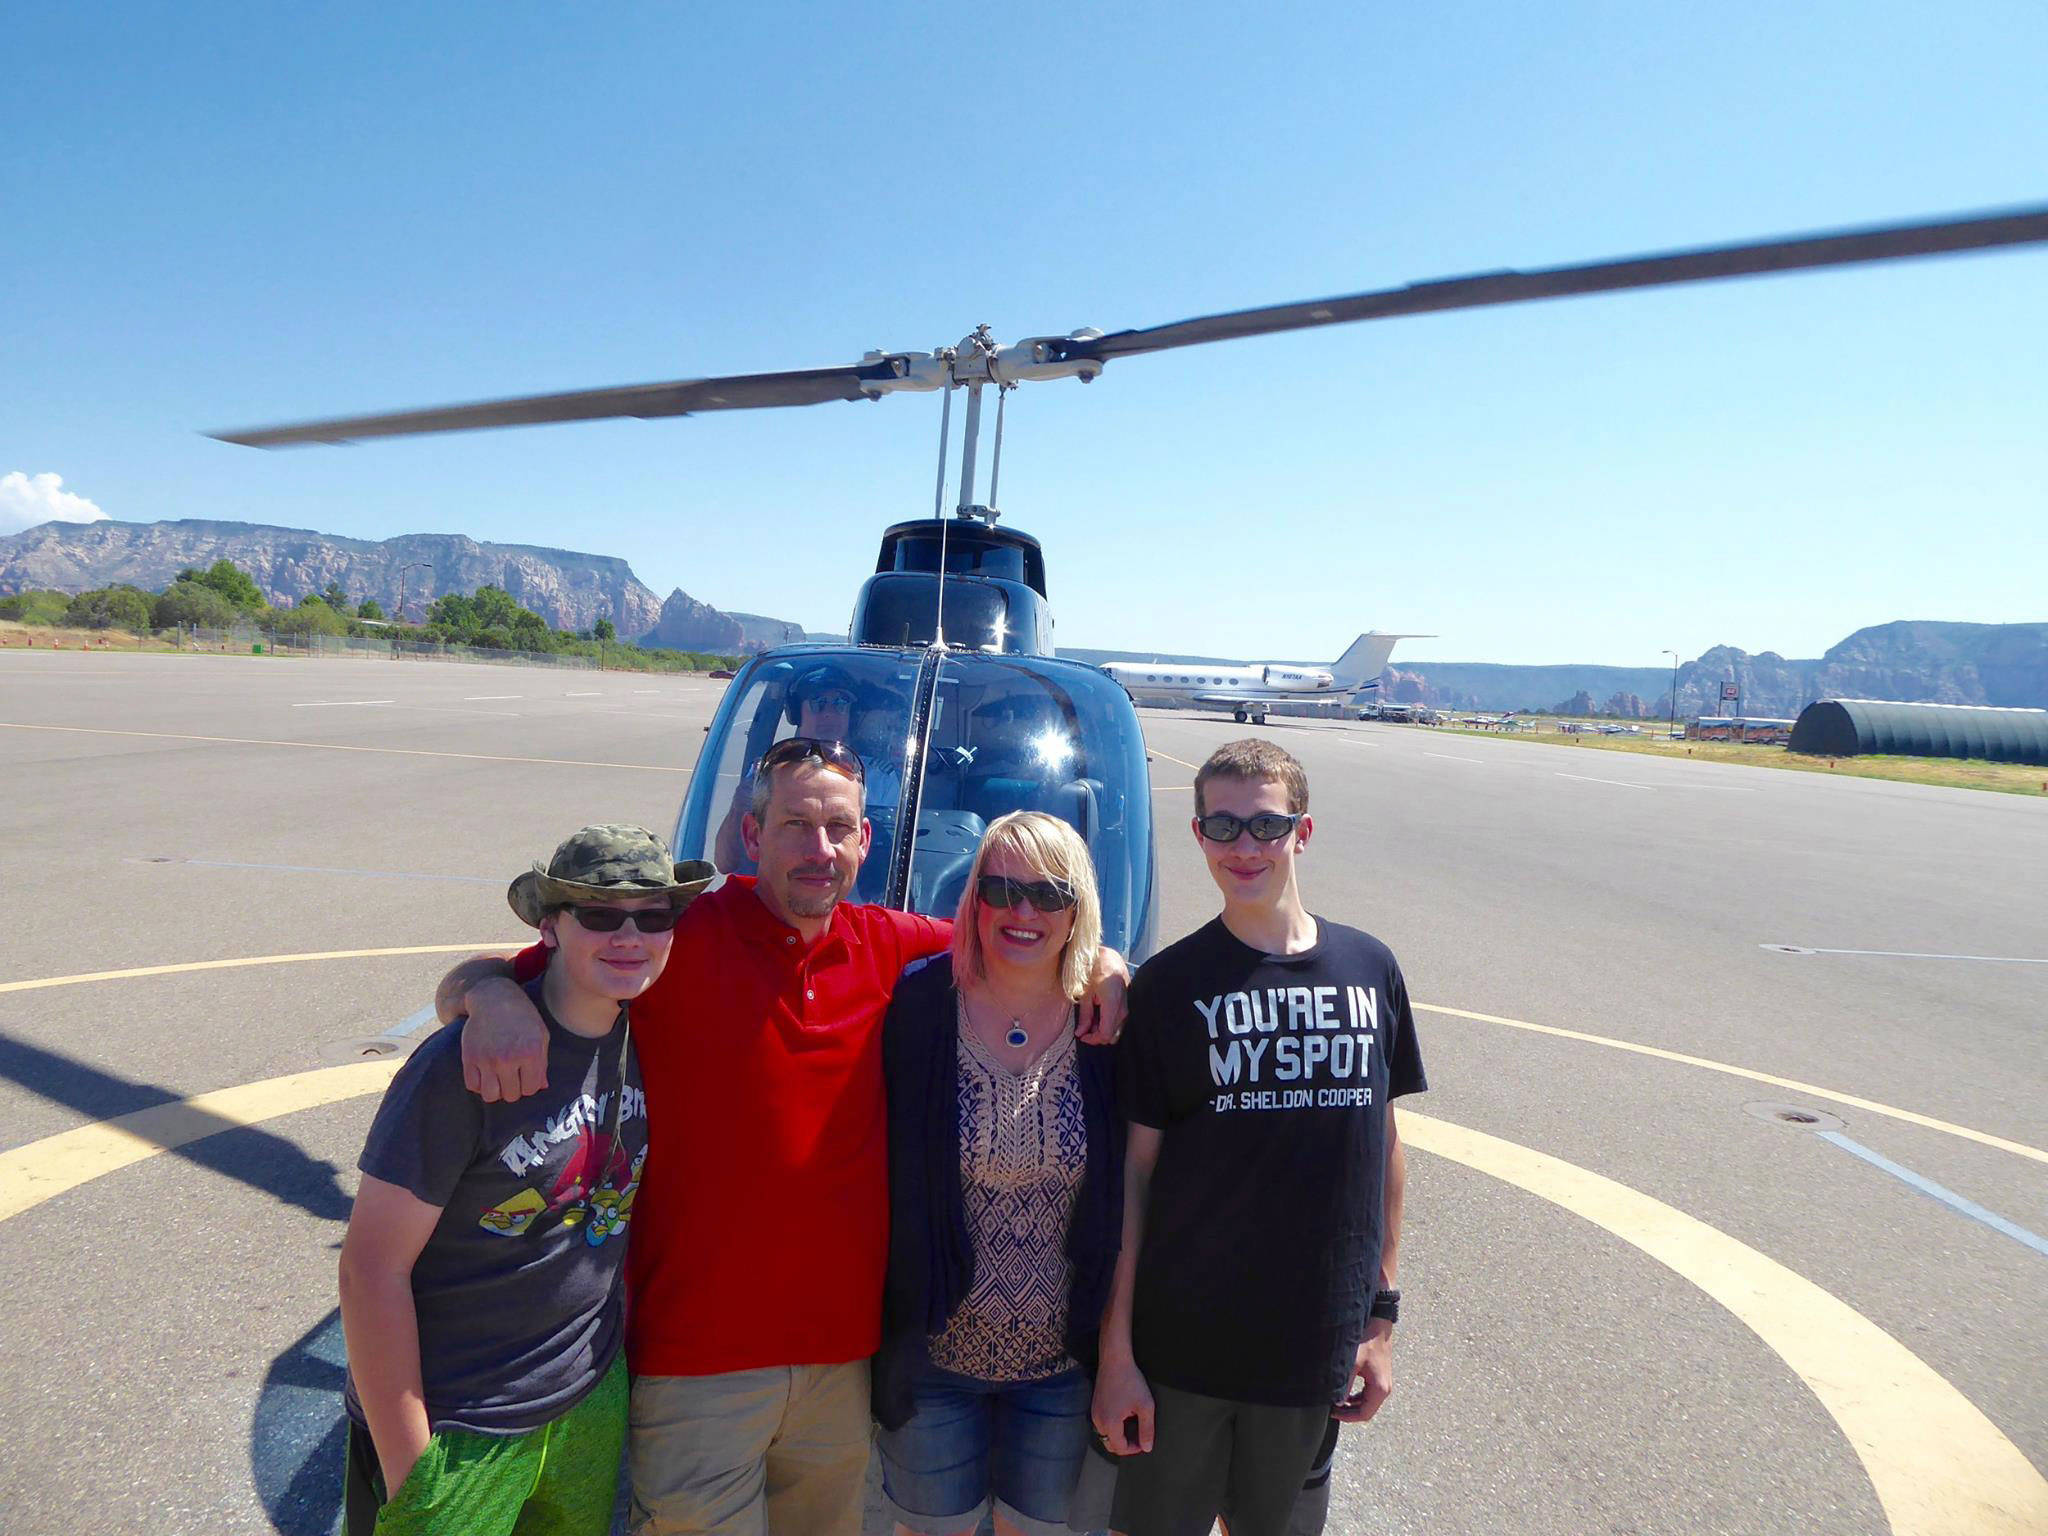 The Streett Family of Sequim, from left, Sawyer, Robert, Josslyn, and Robby, pose for a photo before their first flight over Sedona, Ariz. in July. The family was involved in a car wreck on July 20 that took the lives of Robert and Robby. Josslyn said this was going to be the family’s Christmas card. Photo courtesy of Josslyn Streett